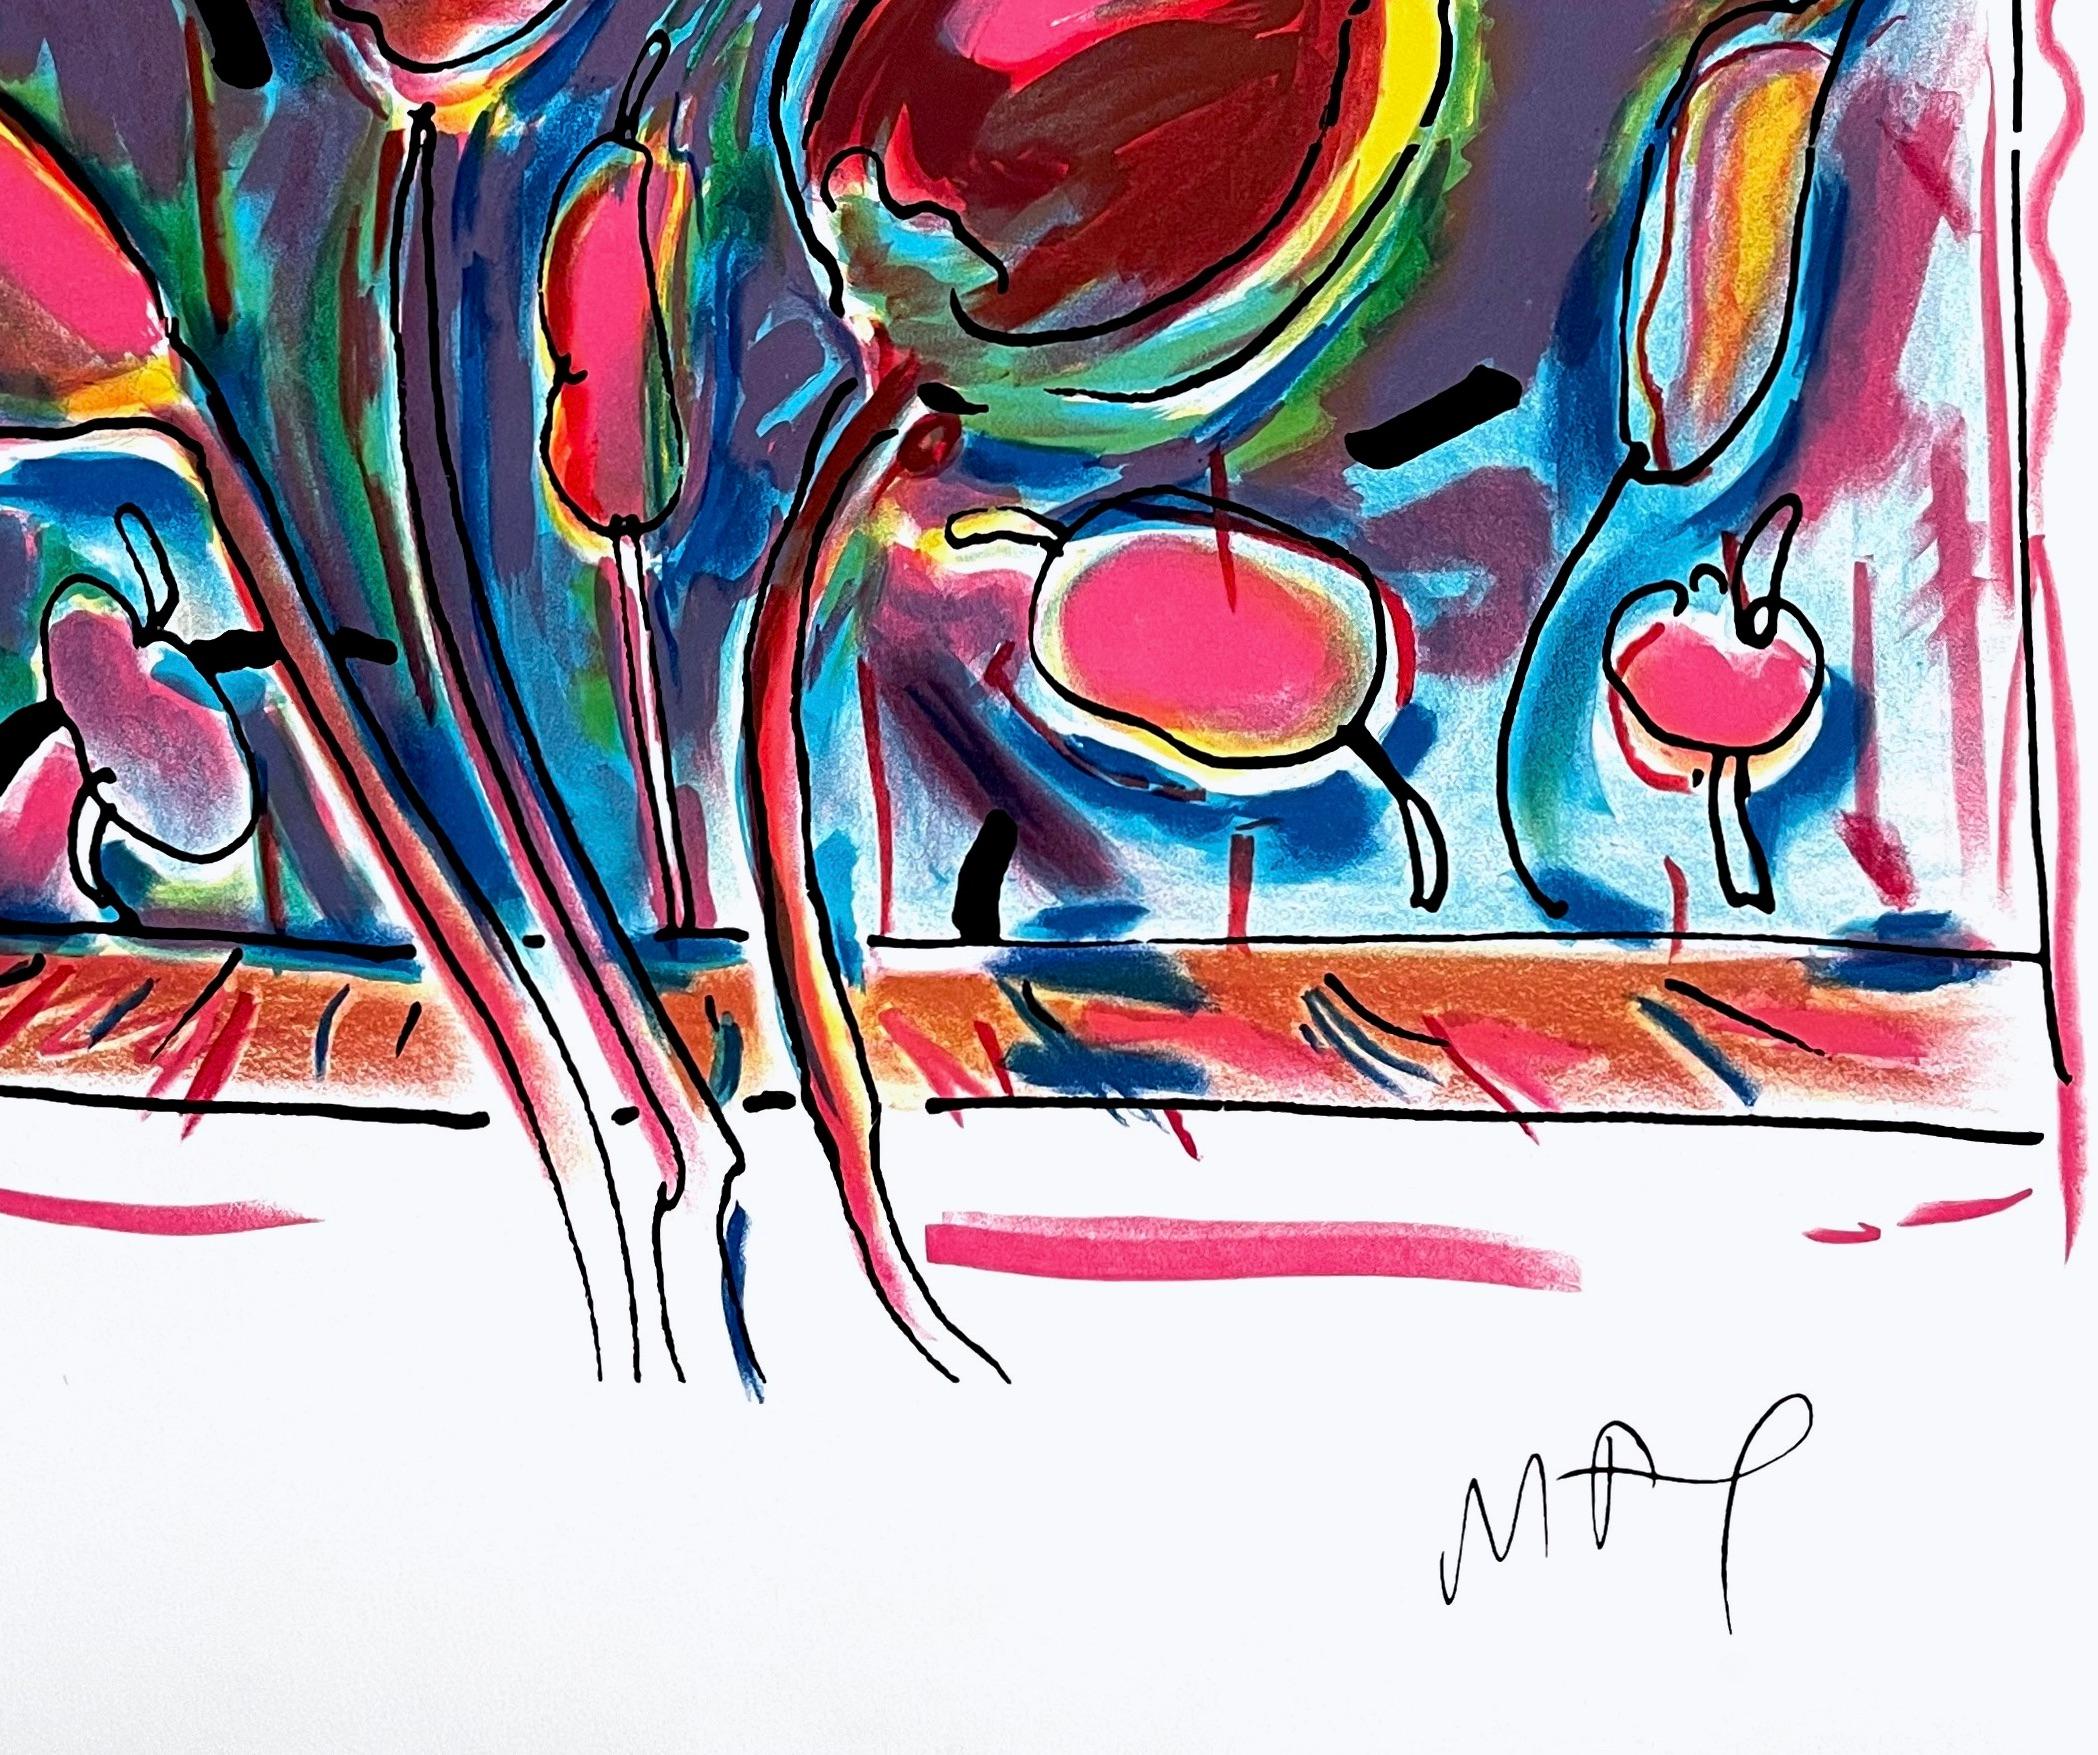 Garden Flowers & Vase of Flowers (Suite of Two Artworks), Peter Max 5